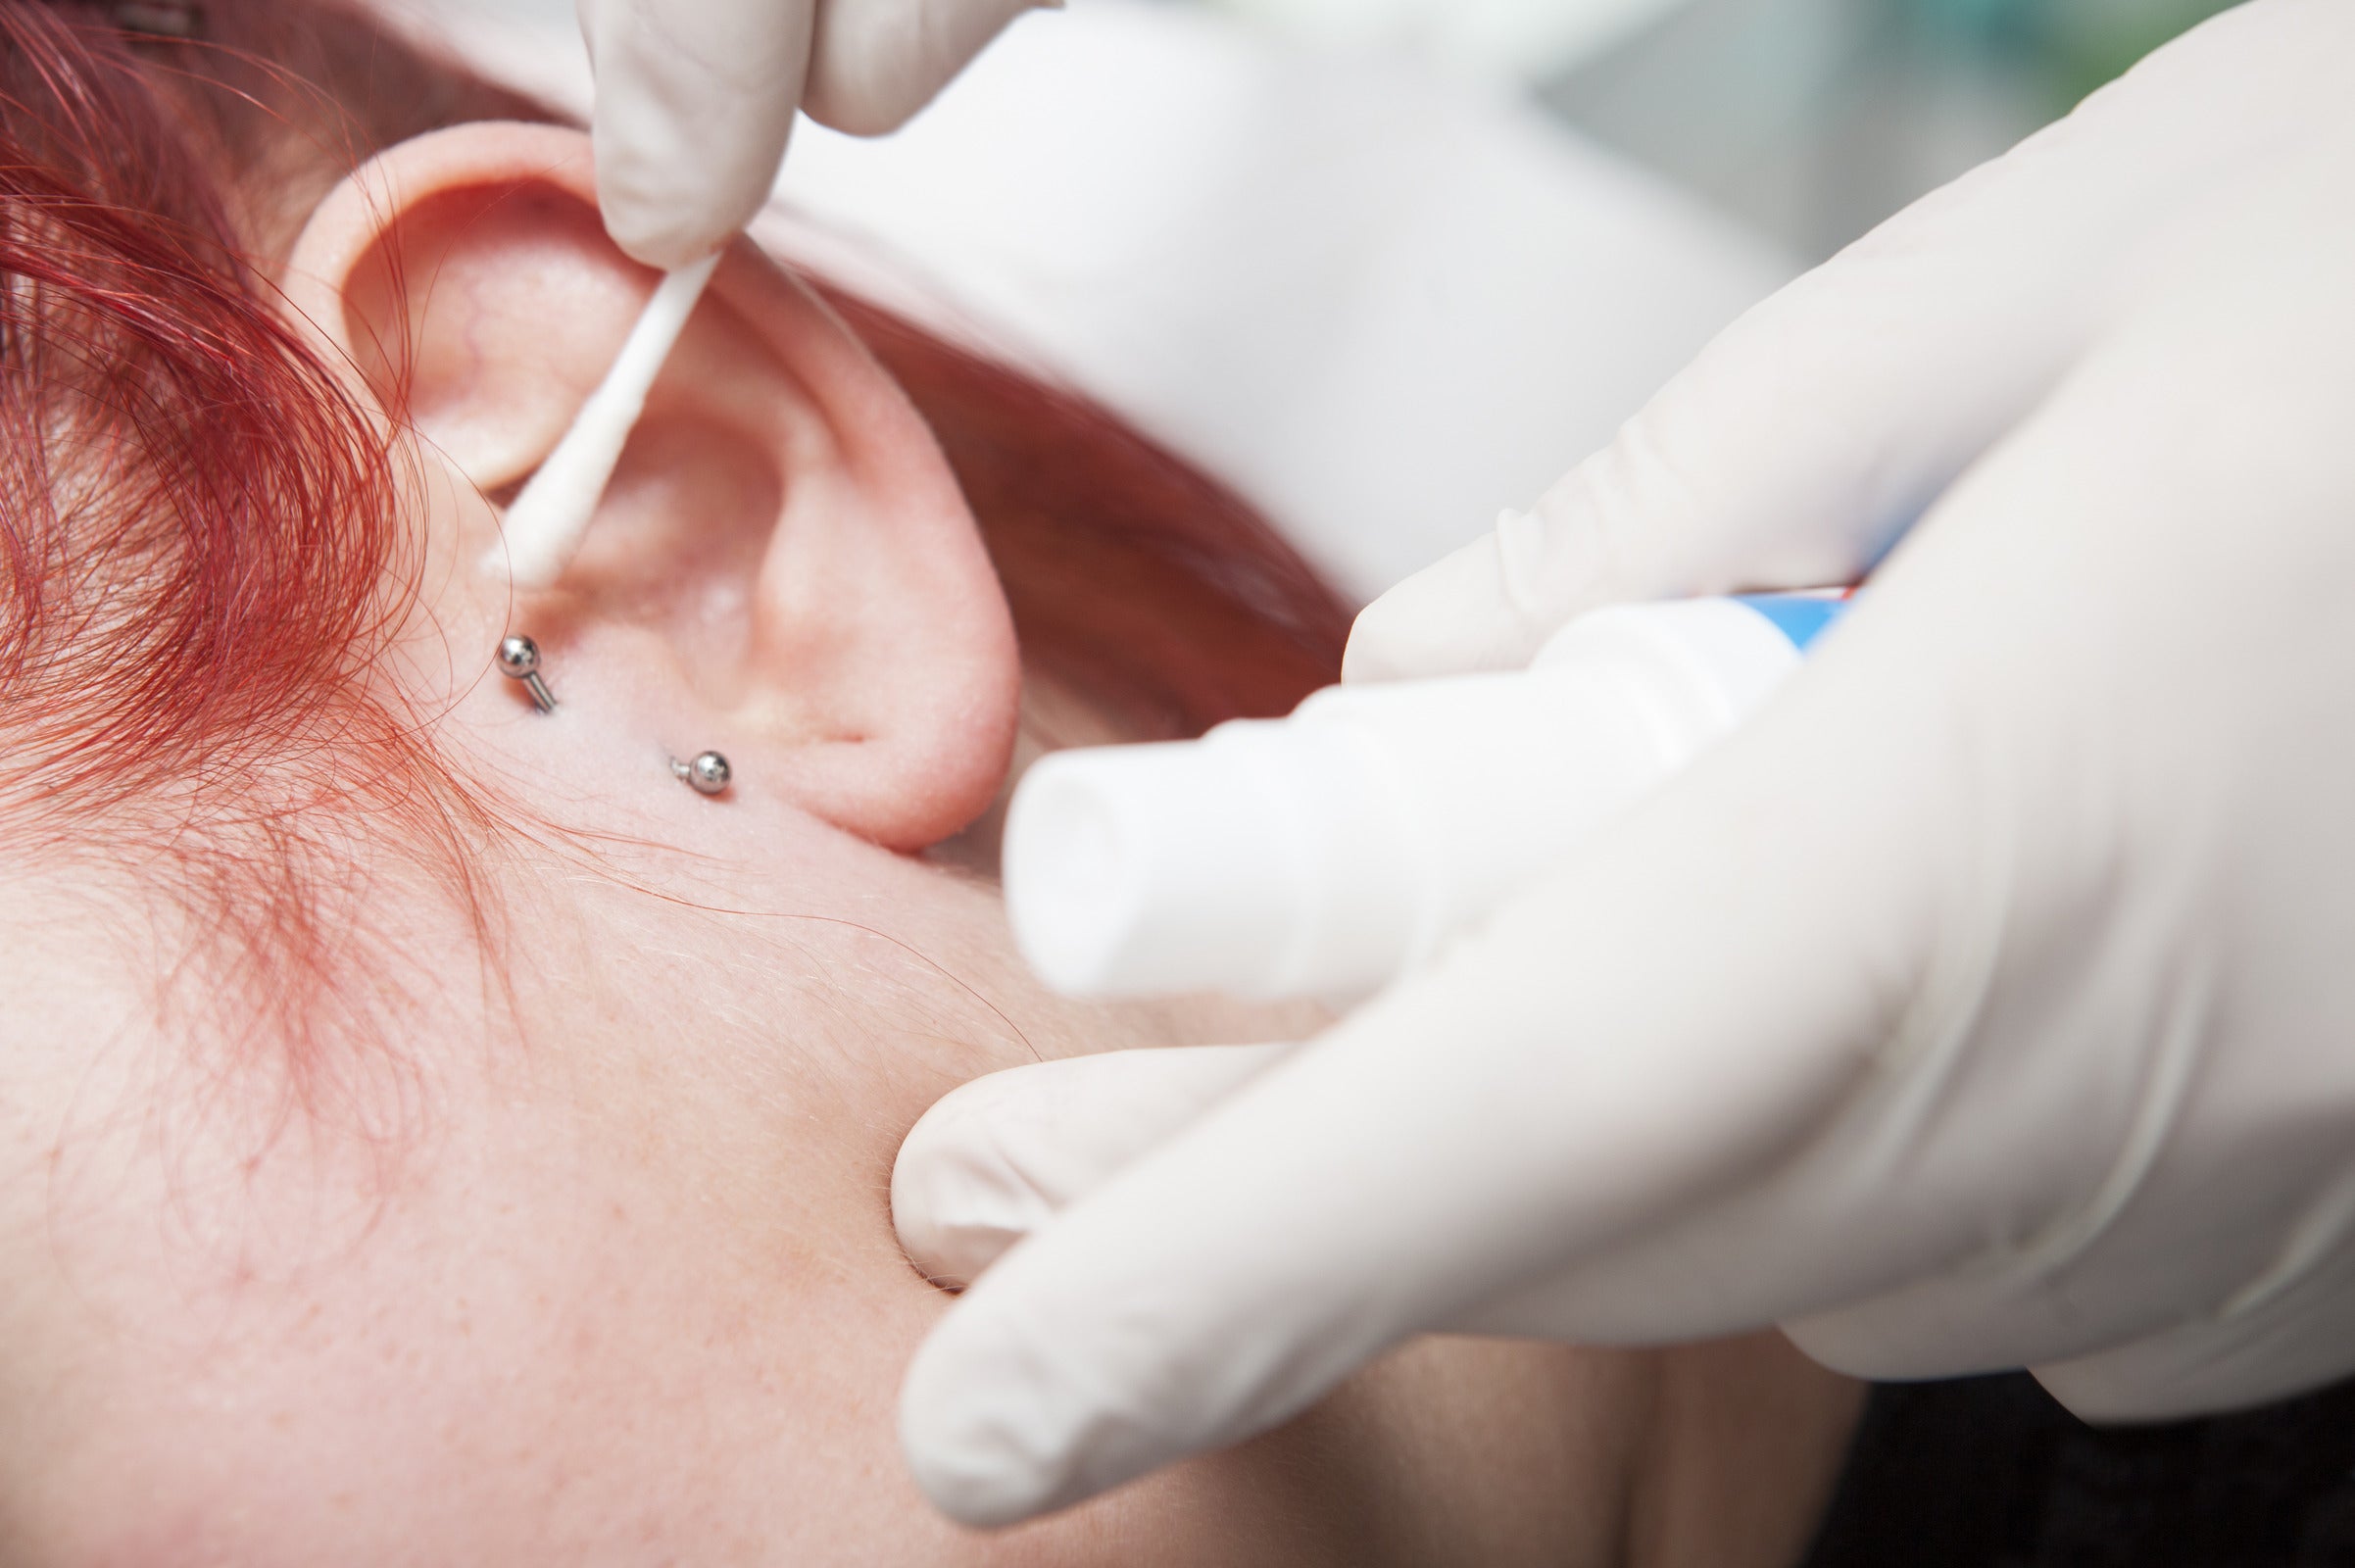 Tragus Piercing is a moderately painful type of ear piercing